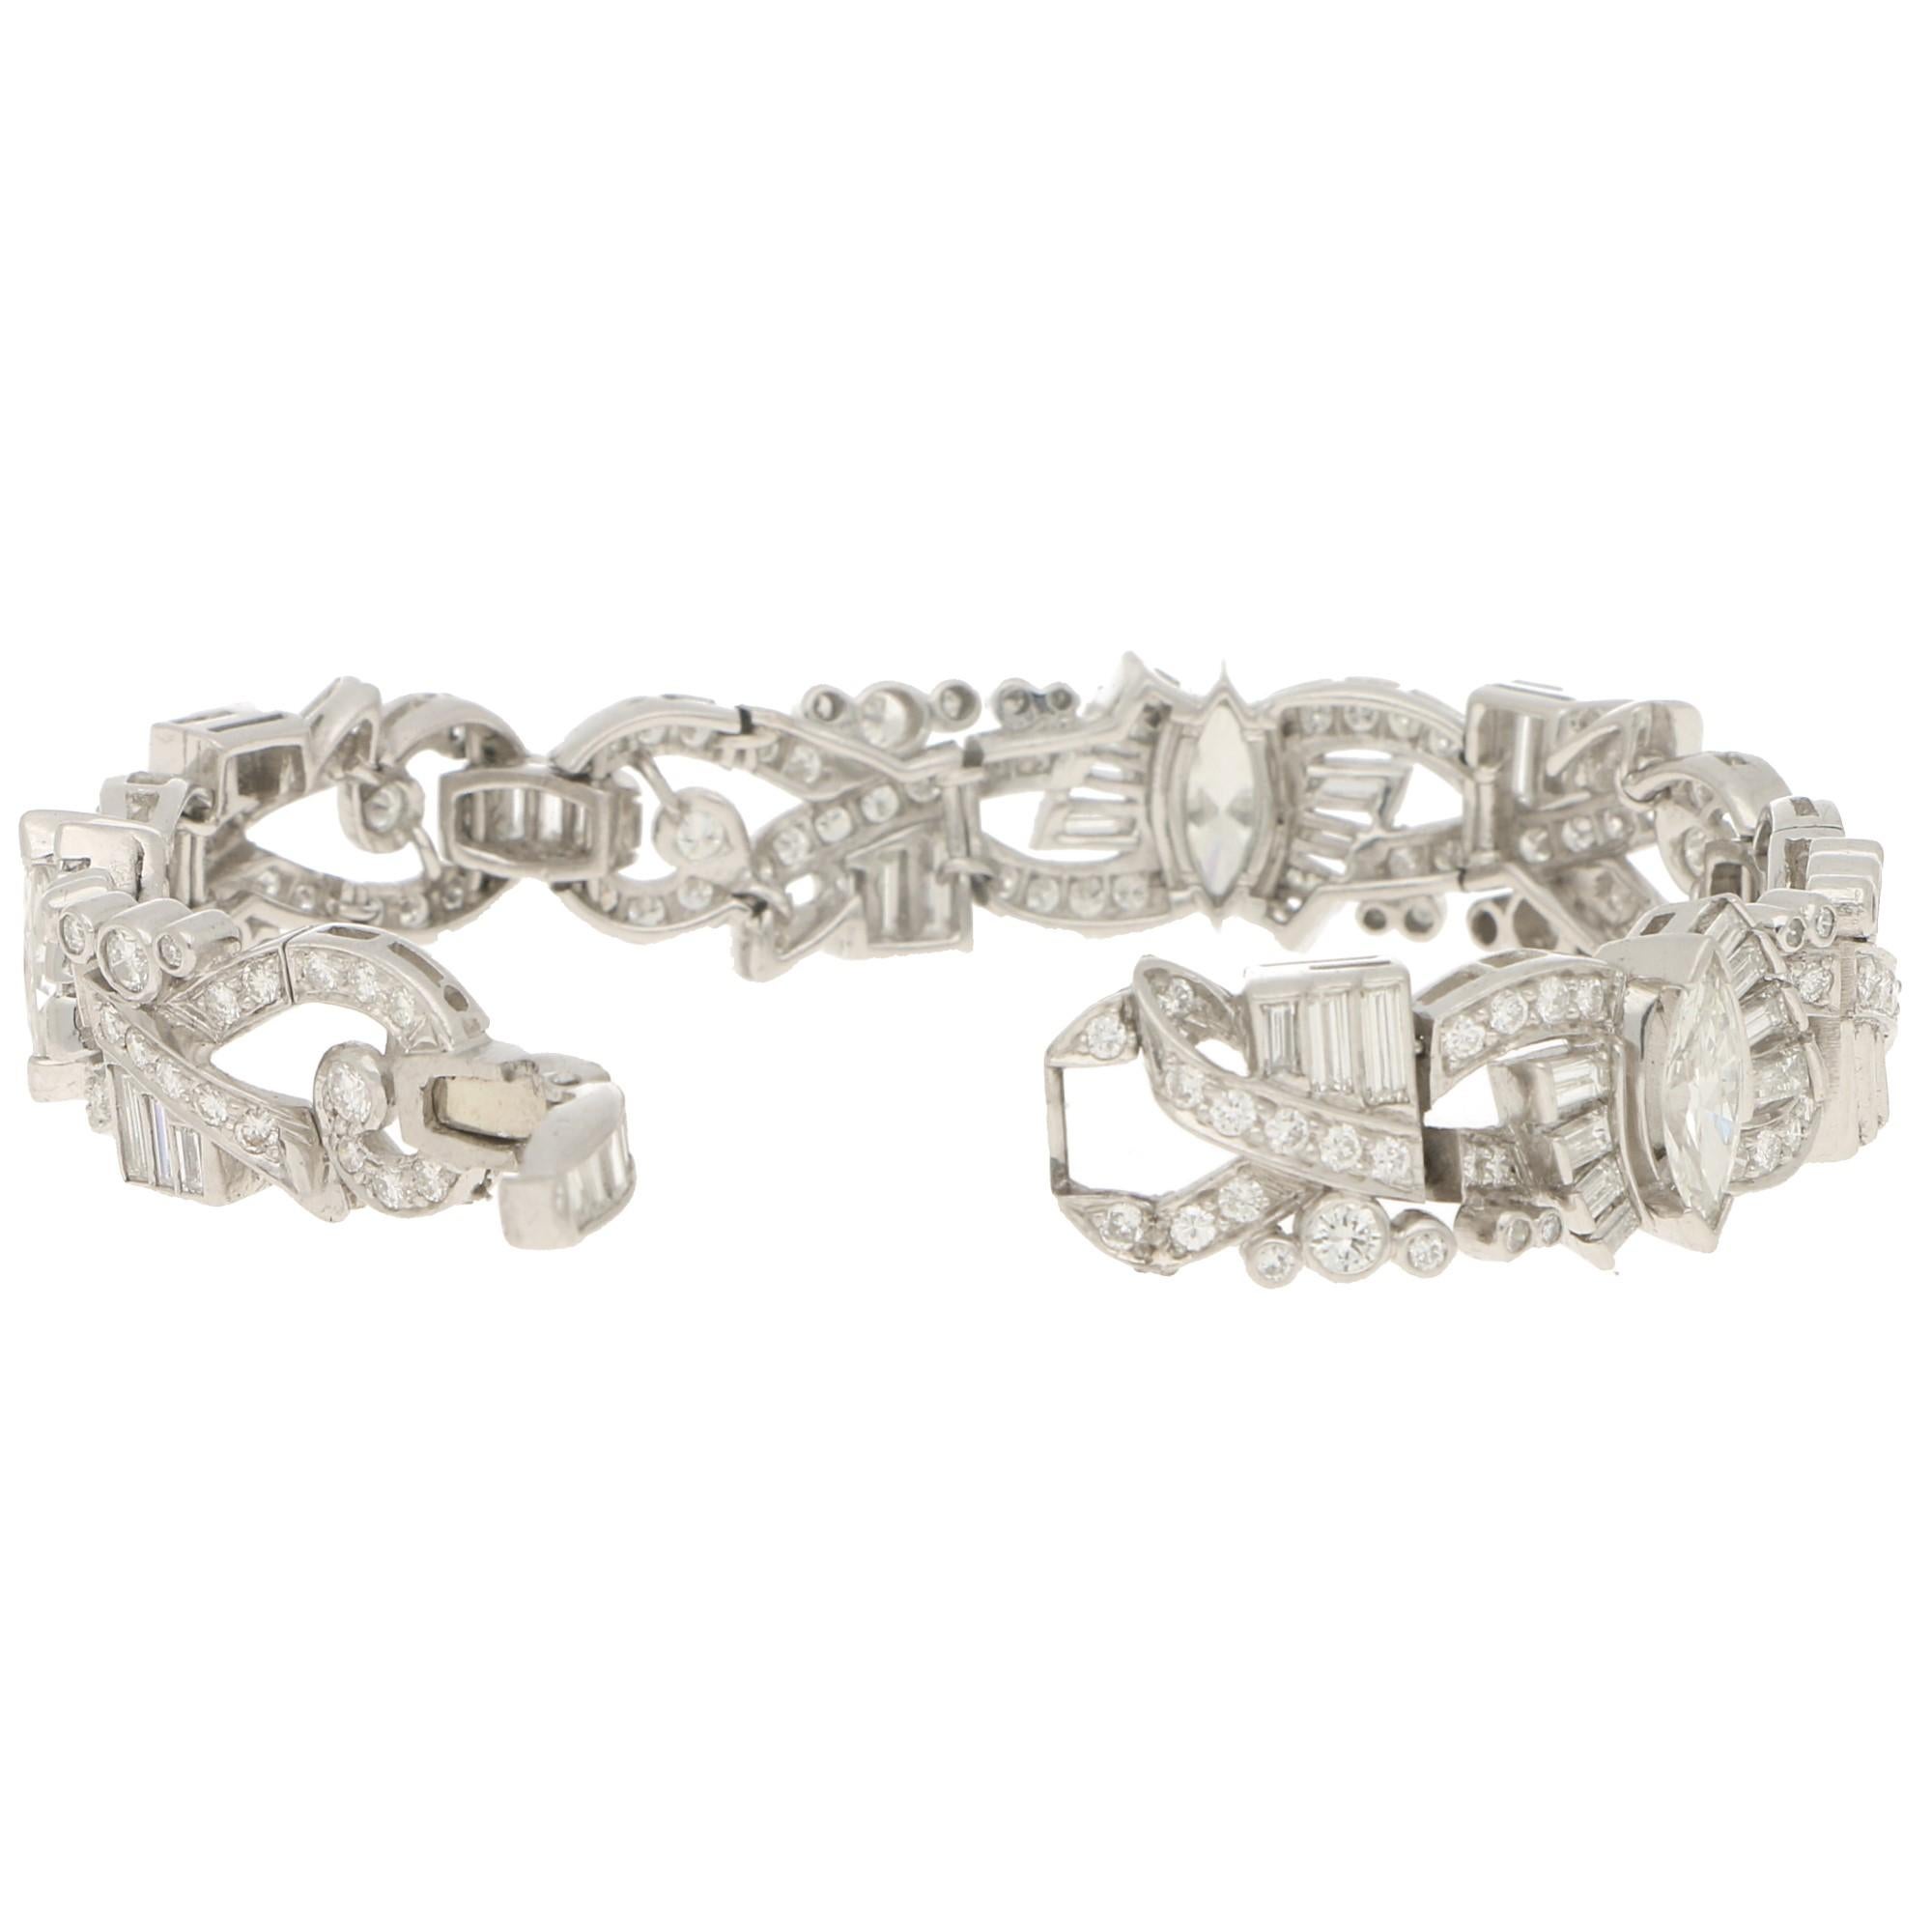 A beautiful Art Deco inspired marquise plaque bracelet set in 18k white gold. 

This beautiful piece is grain and rubover set throughout with round brilliant and baguette cut diamonds and has three large marquise shaped diamonds, one each in the